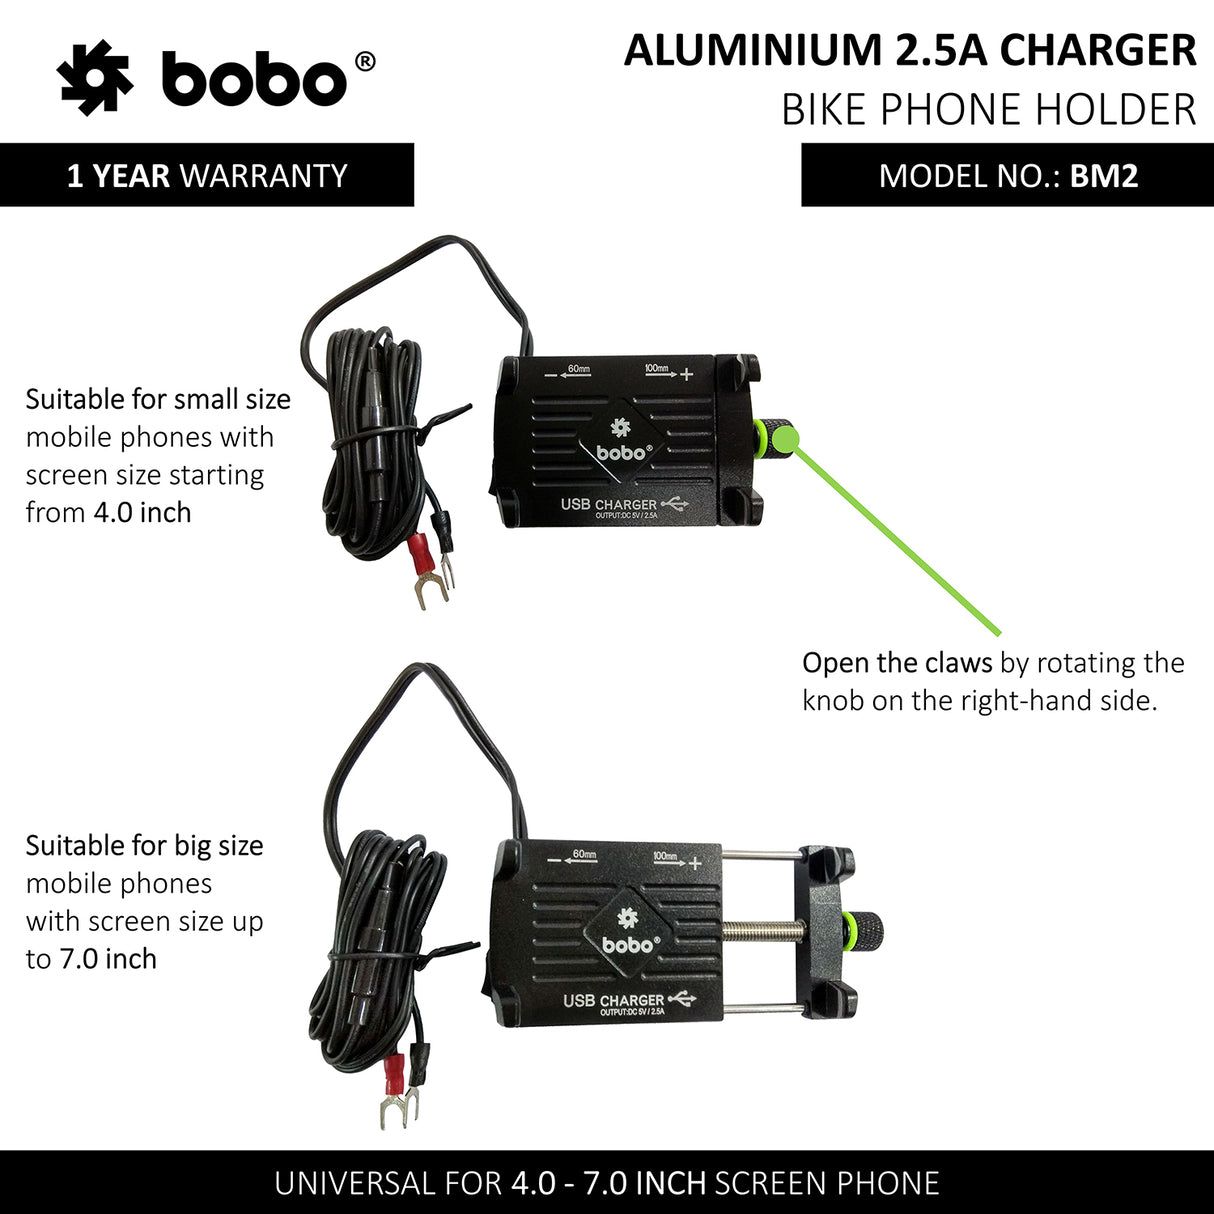 BM2 - Aluminium With 2.5A Charger